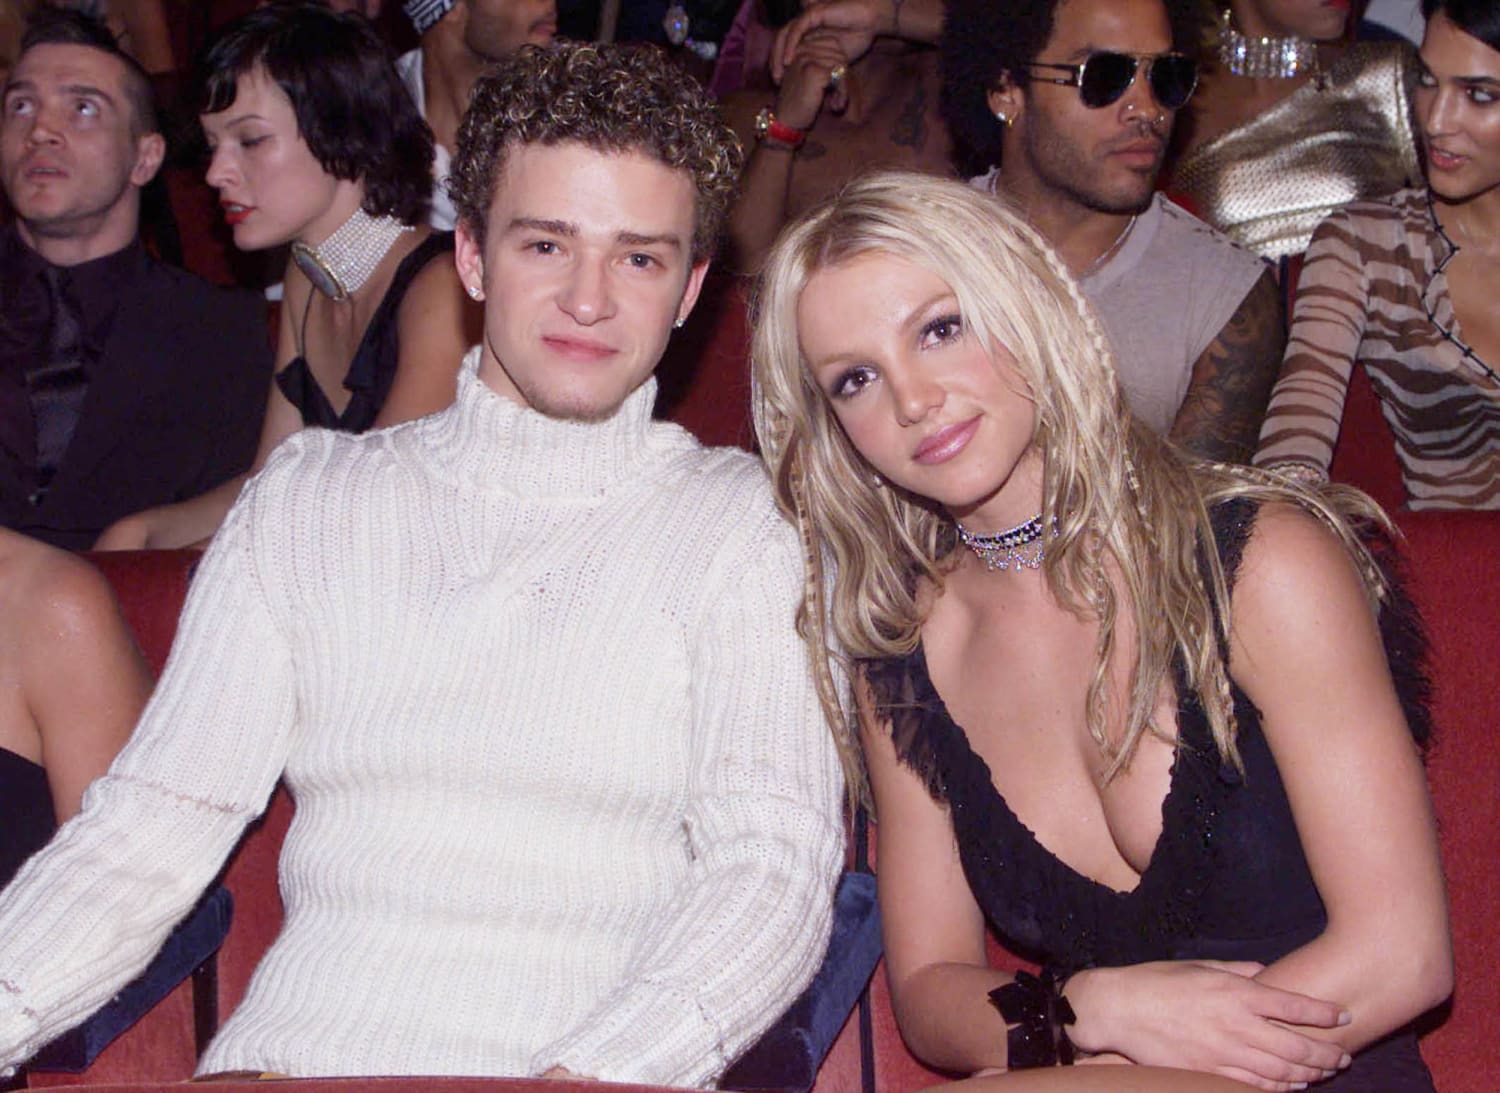 Justin Timberlake saves face with vacation amid Britney Spears